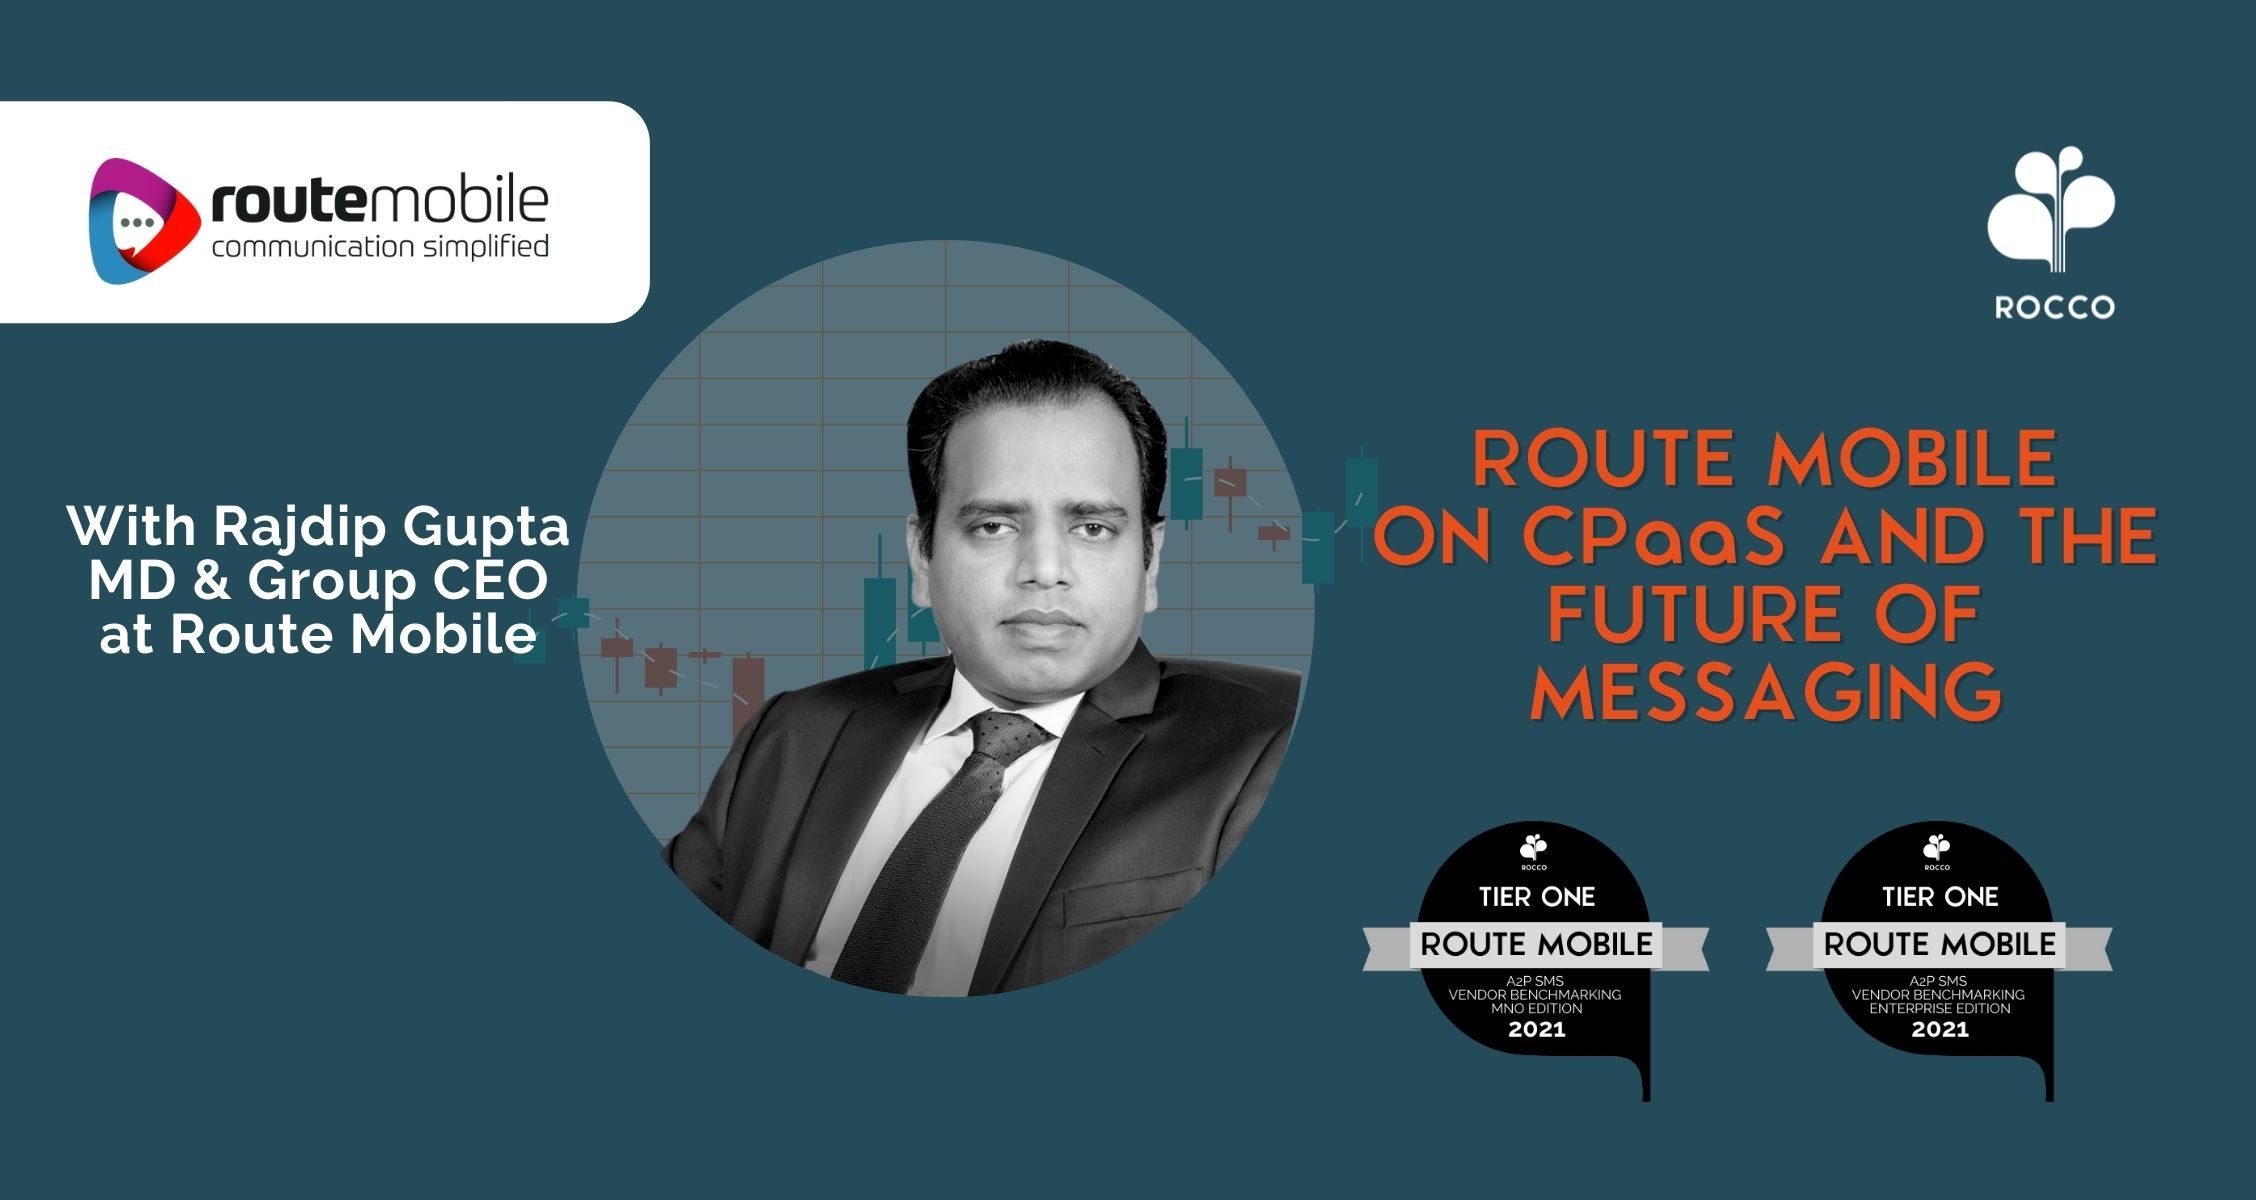 Rajdip Gupta from Route Mobile on CPaaS and the Future of Messaging